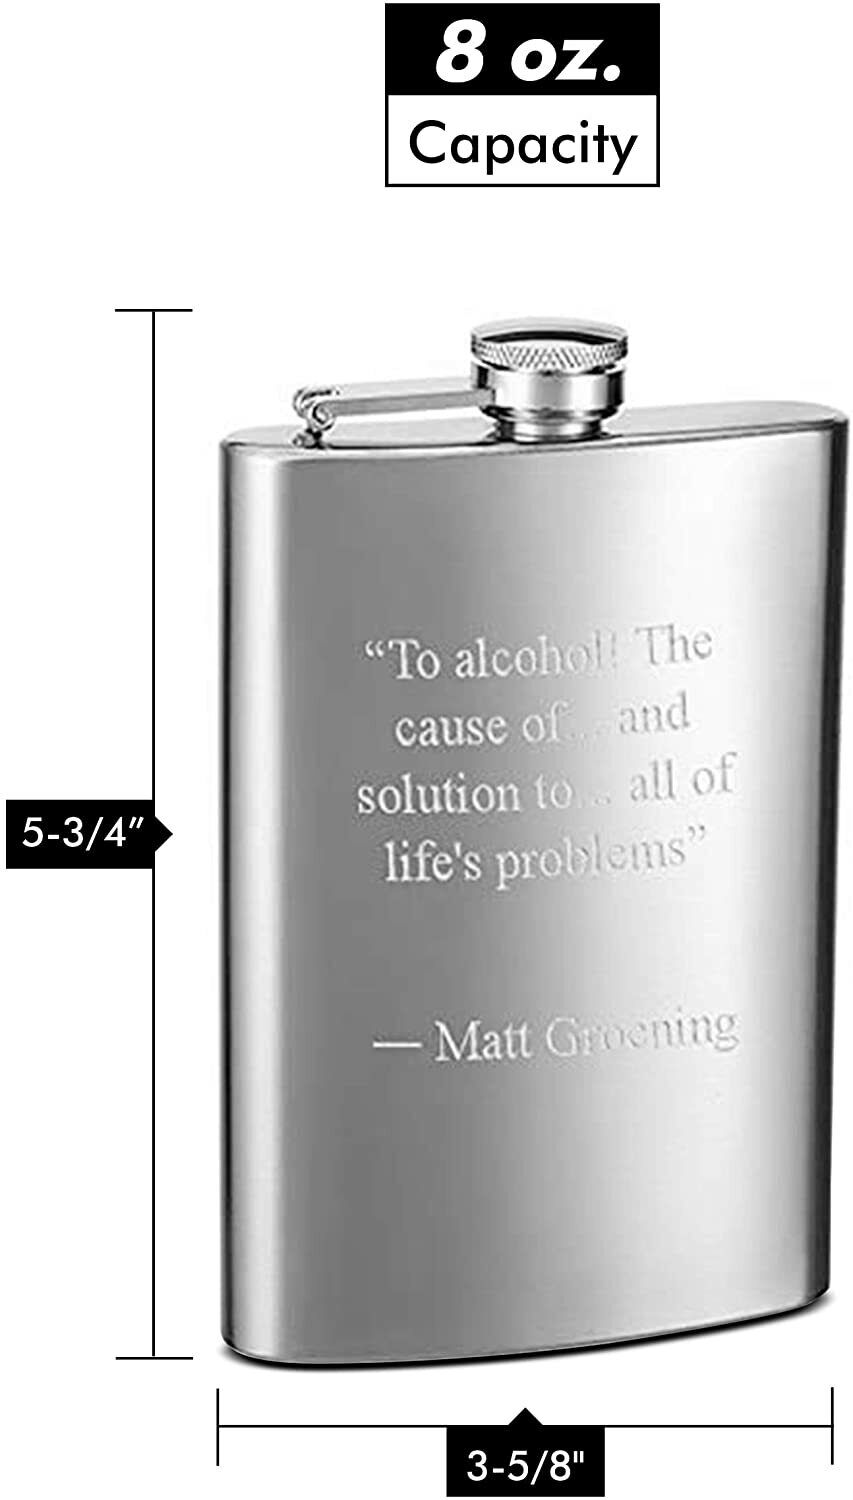 Personalized Hip Flask, Custom Engraved Etching, Special Occasions and Weddings Top Shelf Flasks EN8OZFLASKS - фотография #3